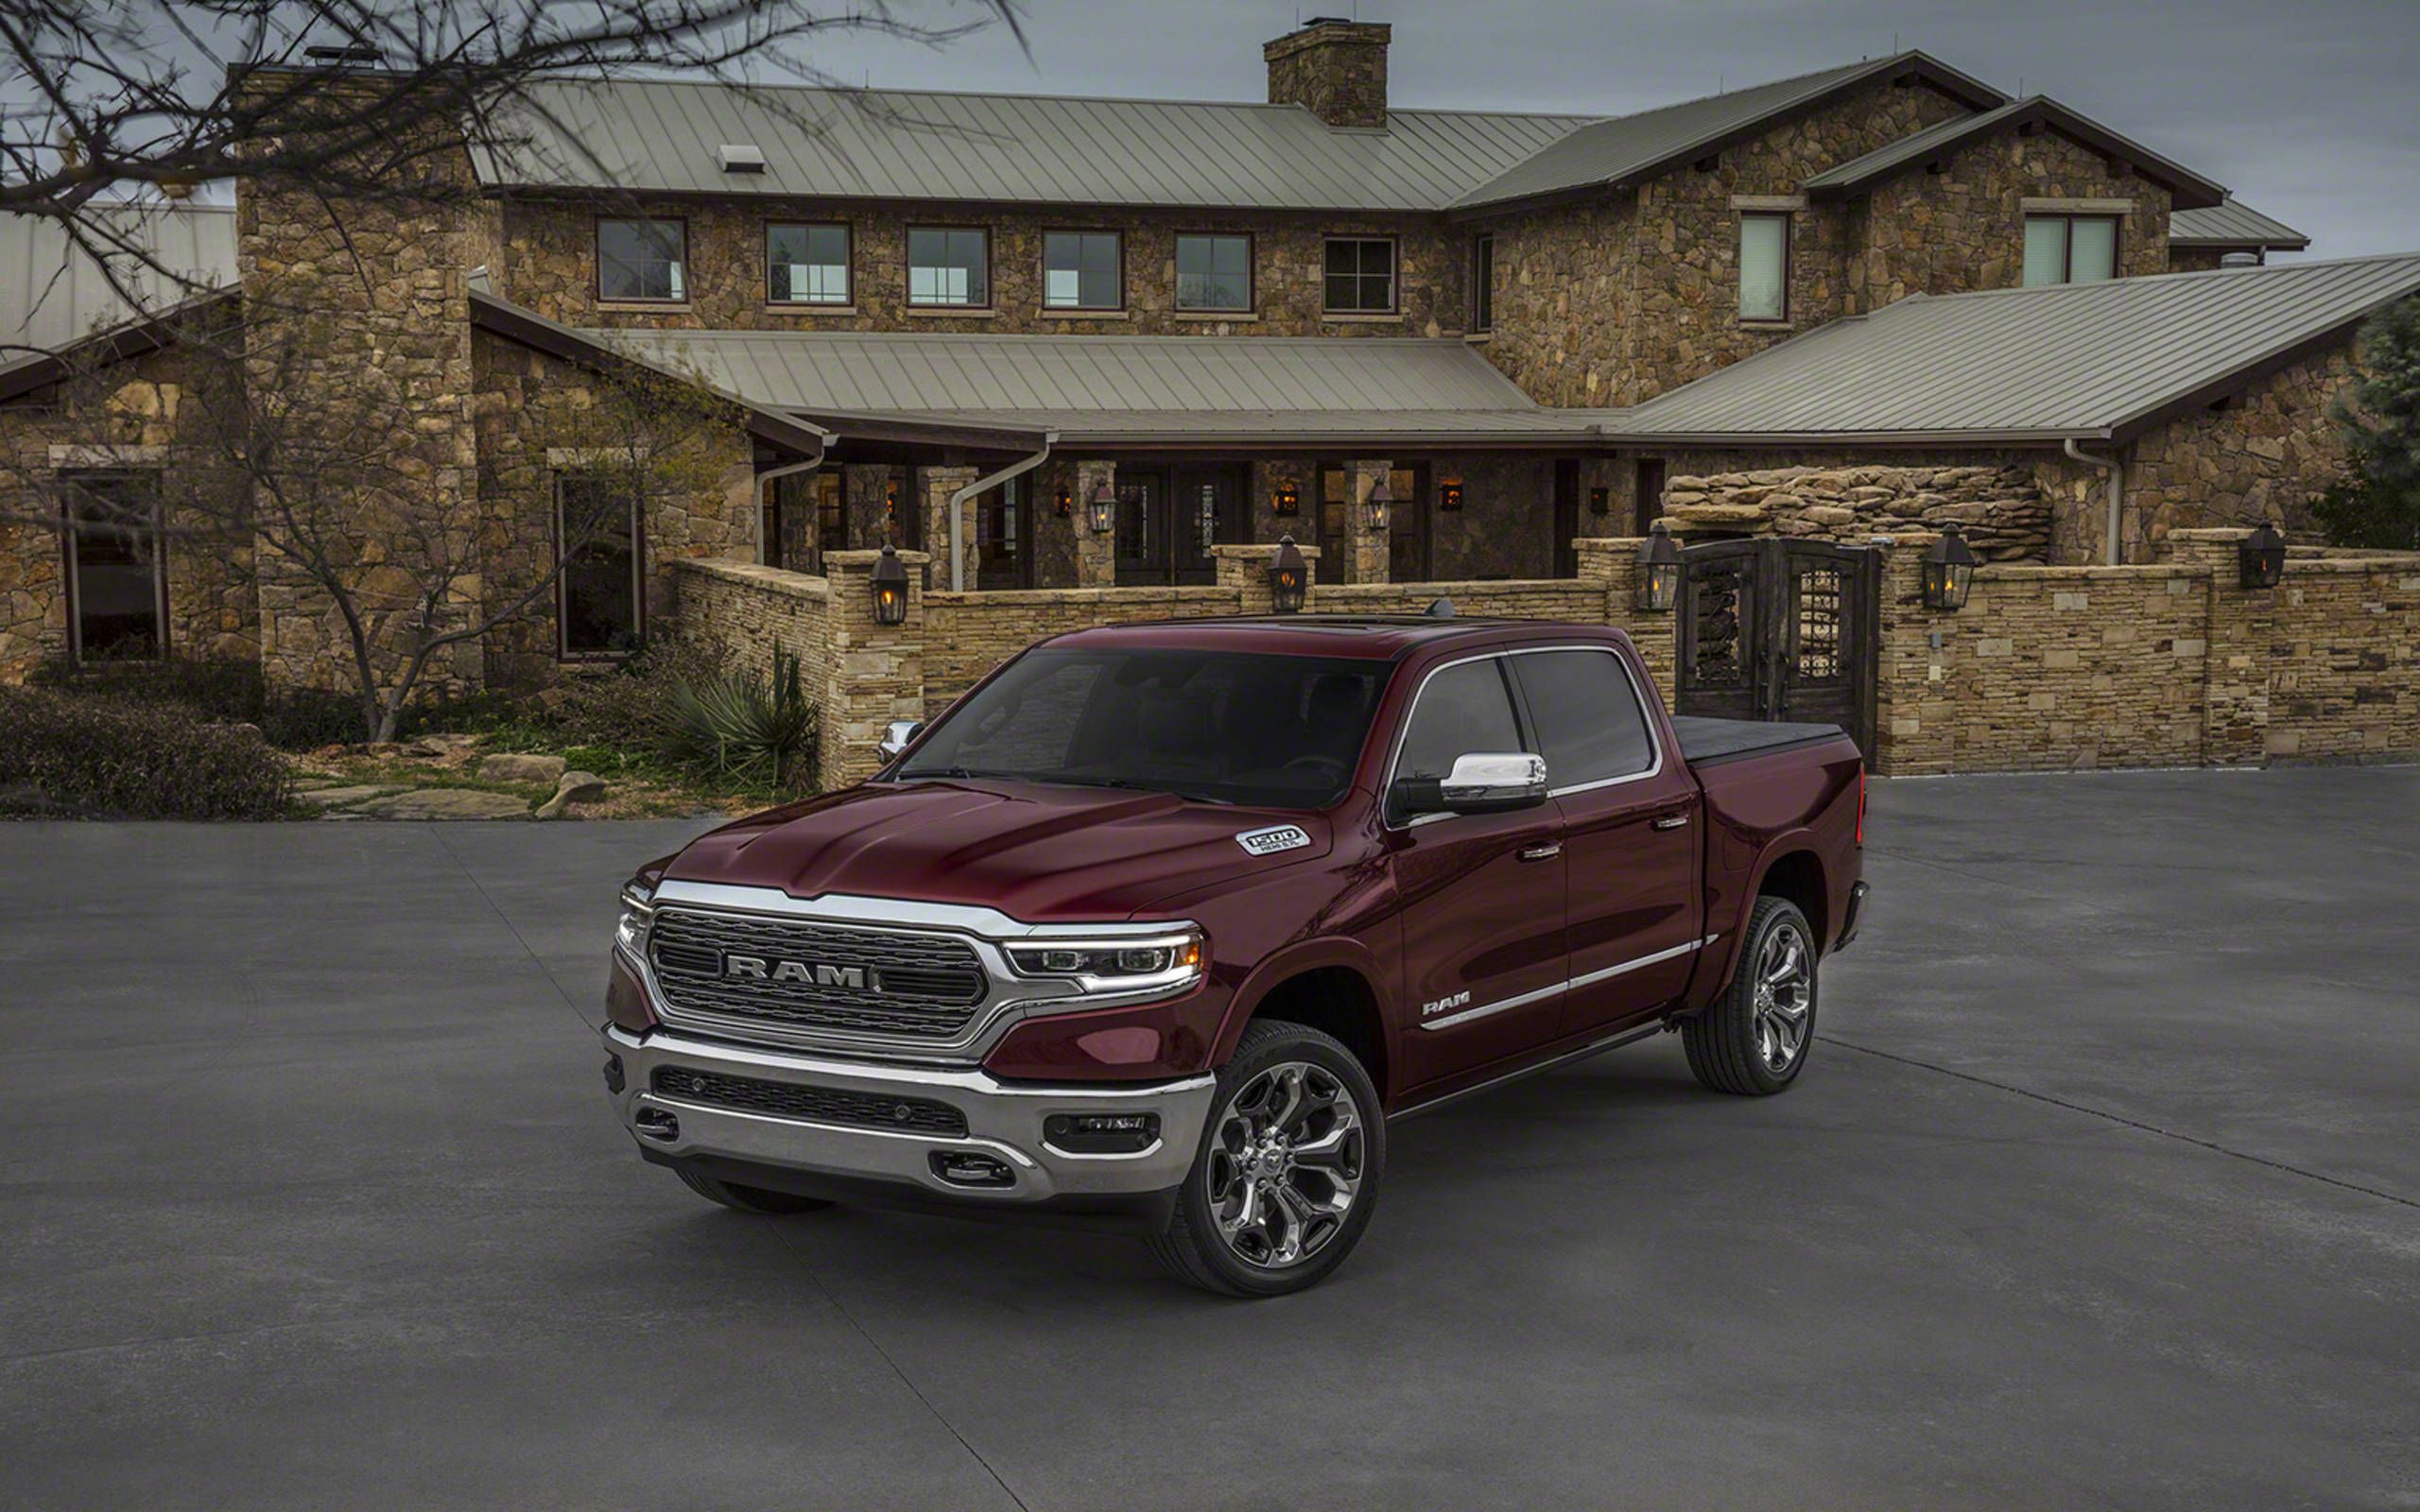 2019 Ram 1500 pricing released: Your pickup starts at $33,340 (and way up from there)